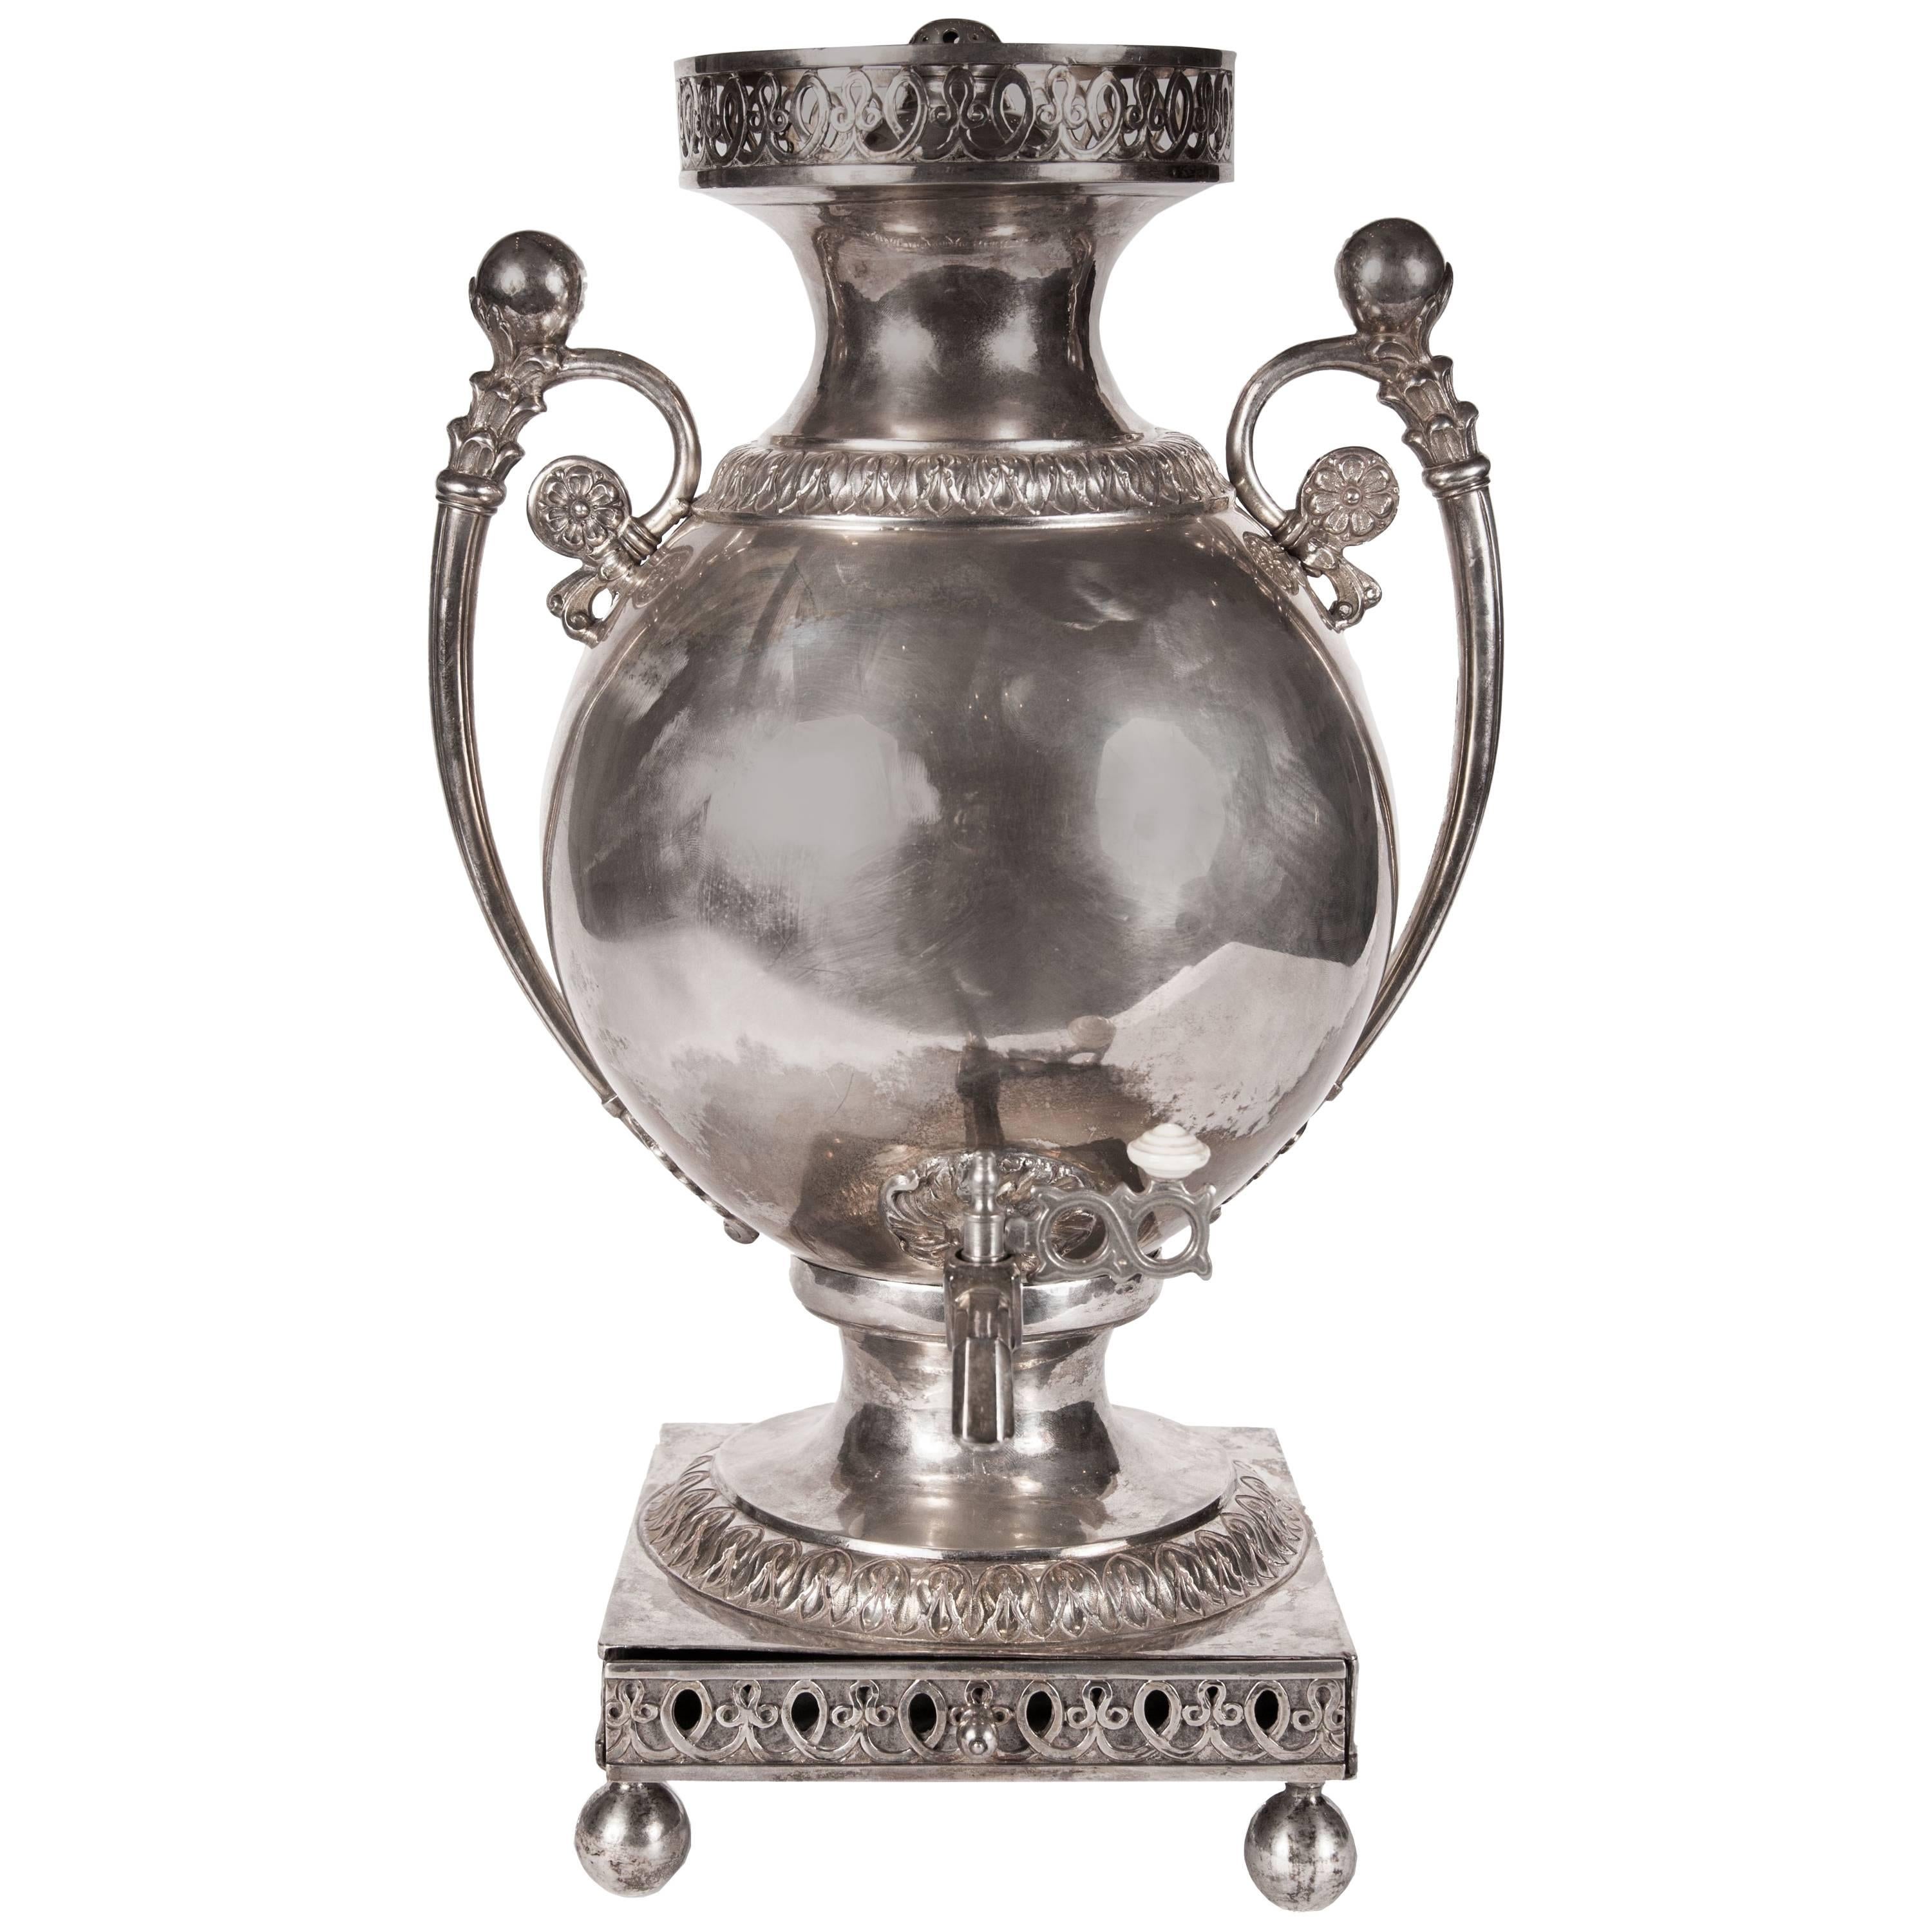 Antique 18th Century Russian Solid Silver Samovar